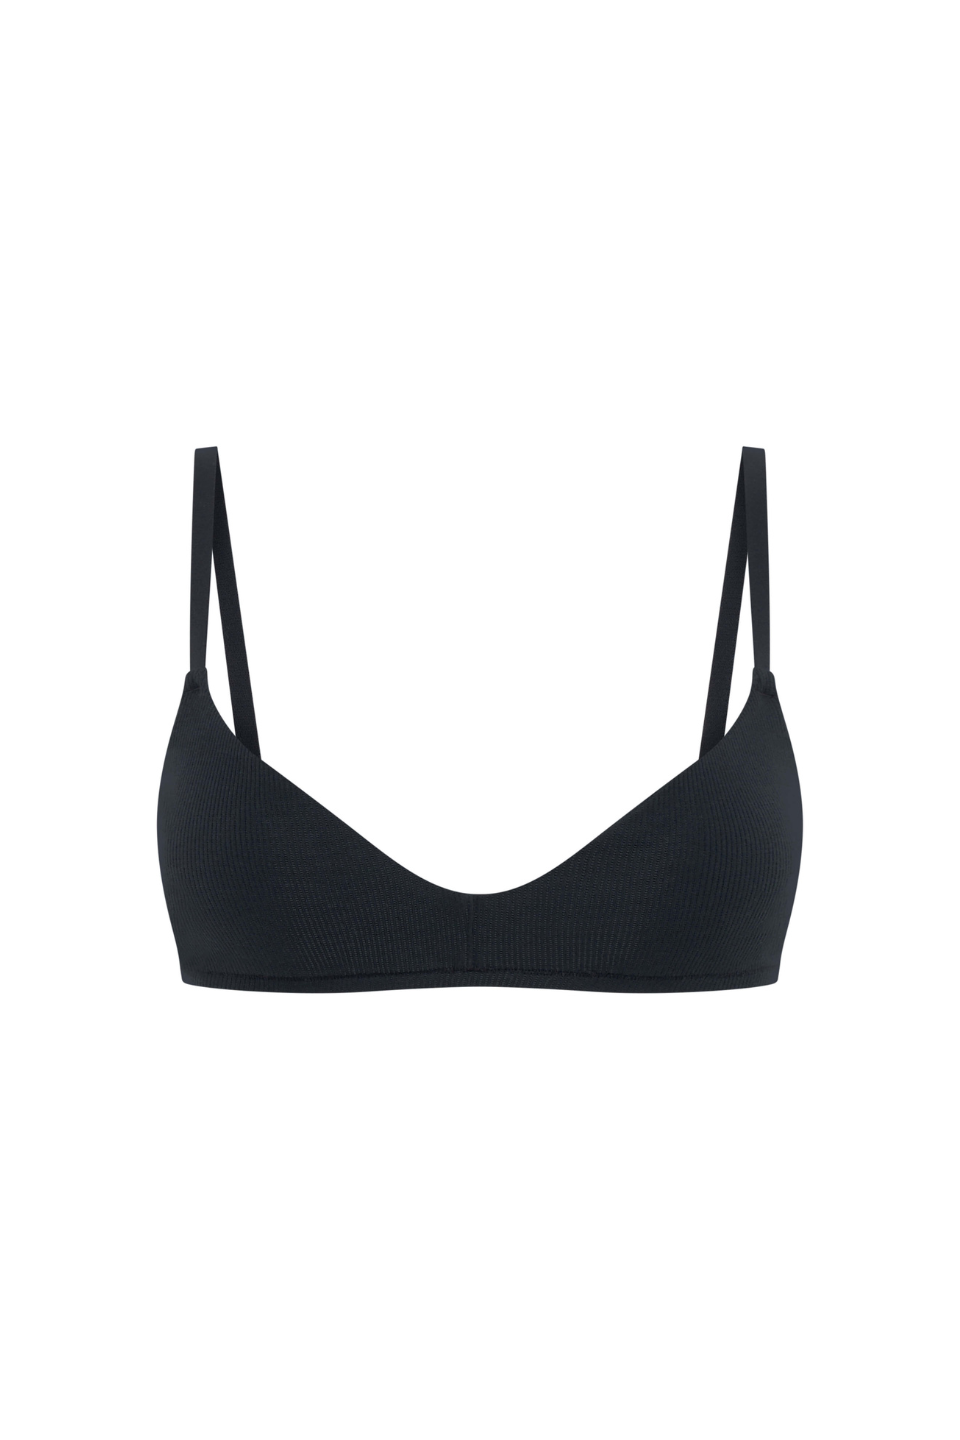 The Ribbed Bralette, Bras - First Thing Underwear